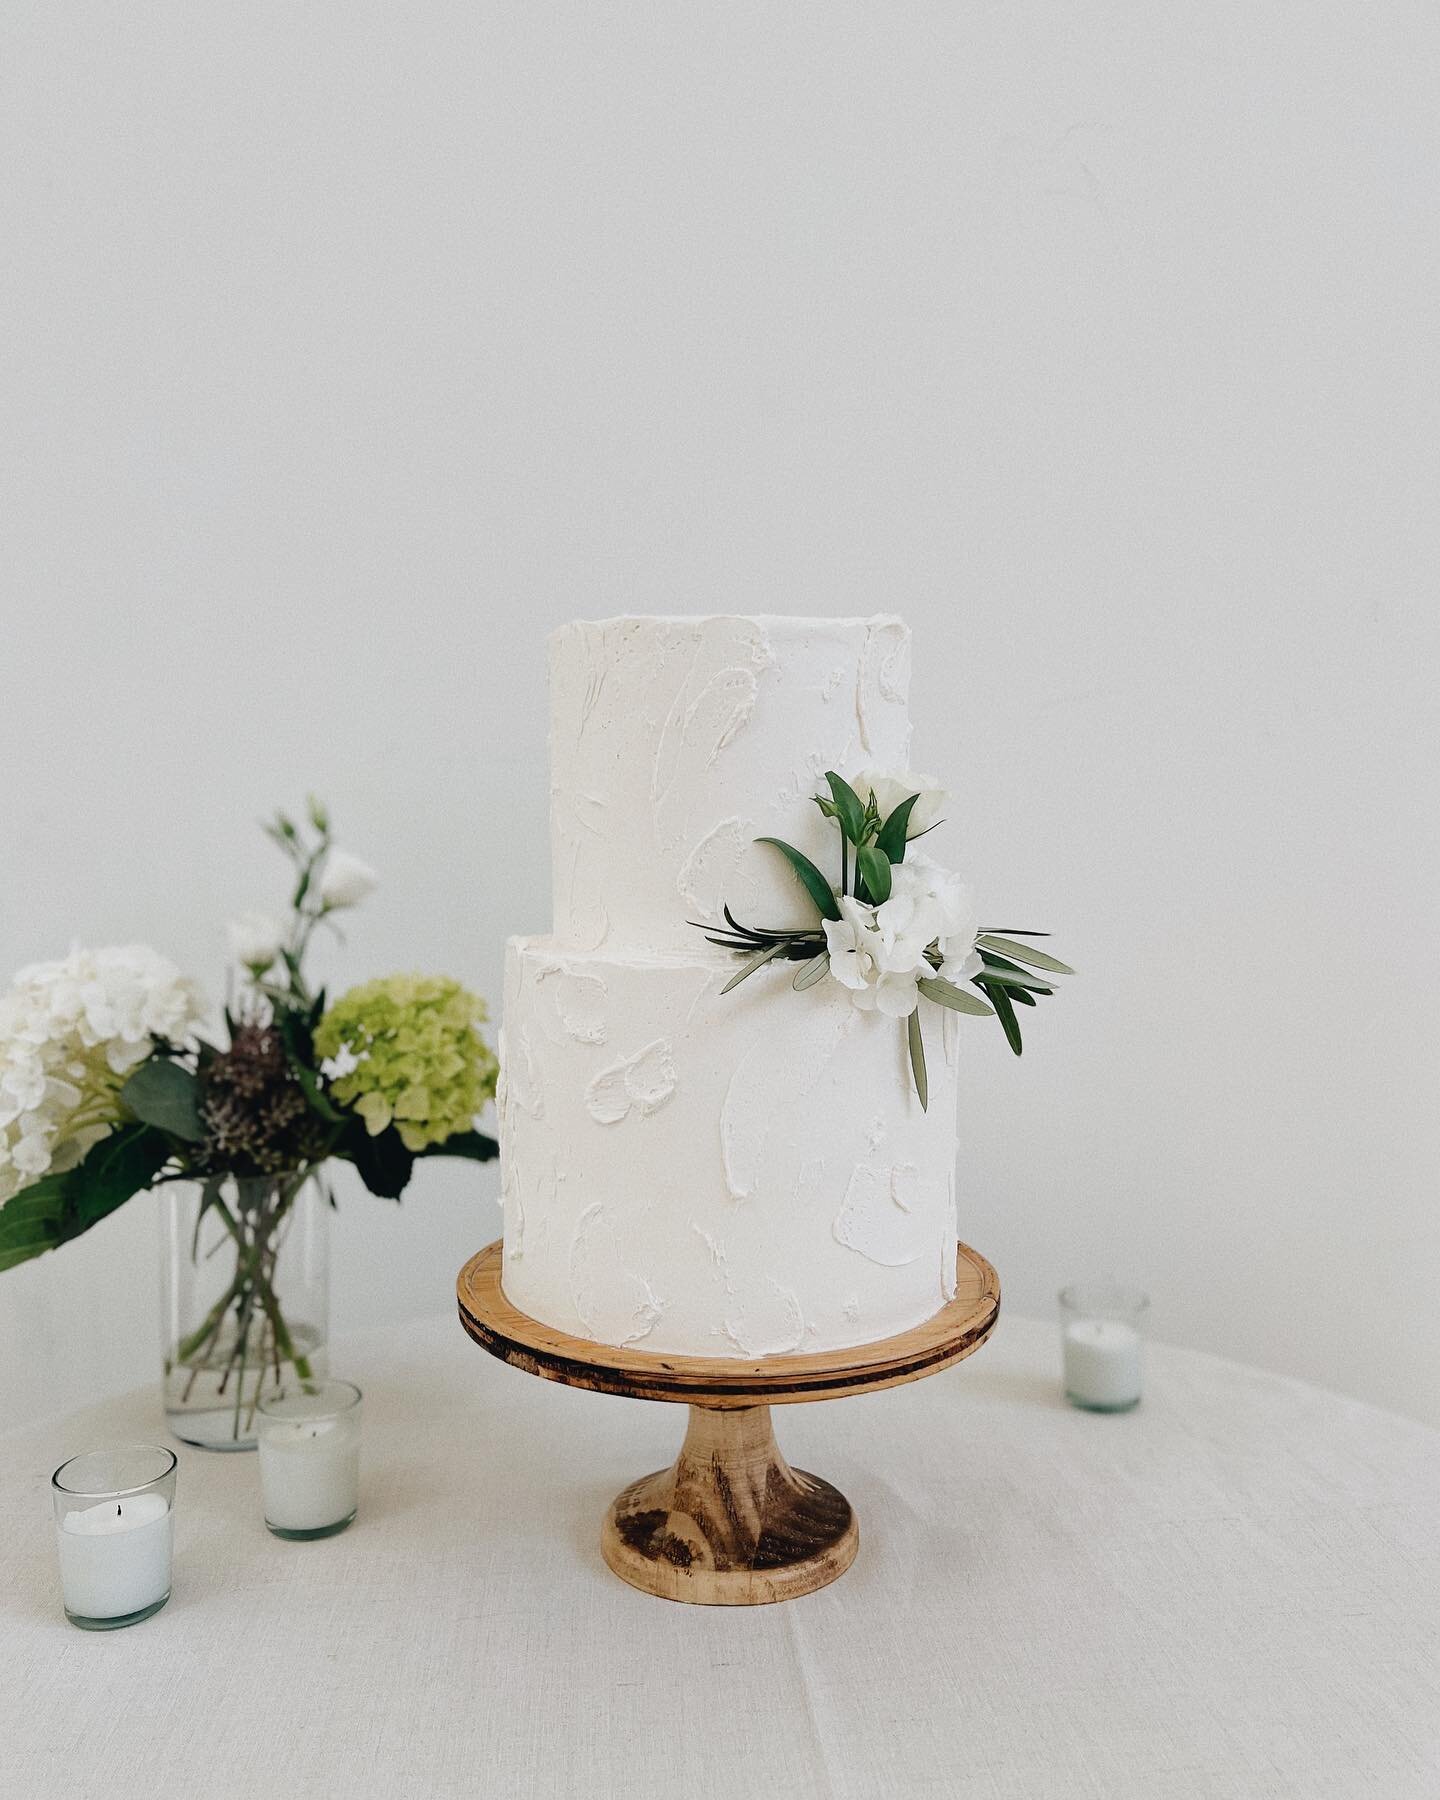 a simple textured two tiered cake with some minimal fresh floral 

flavors: coconut cake and chocolate bourbon cake, all with vanilla buttercream (&amp; some mini chocolate chip sea salt cookies for a milk &amp; cookies shot!) 🍪